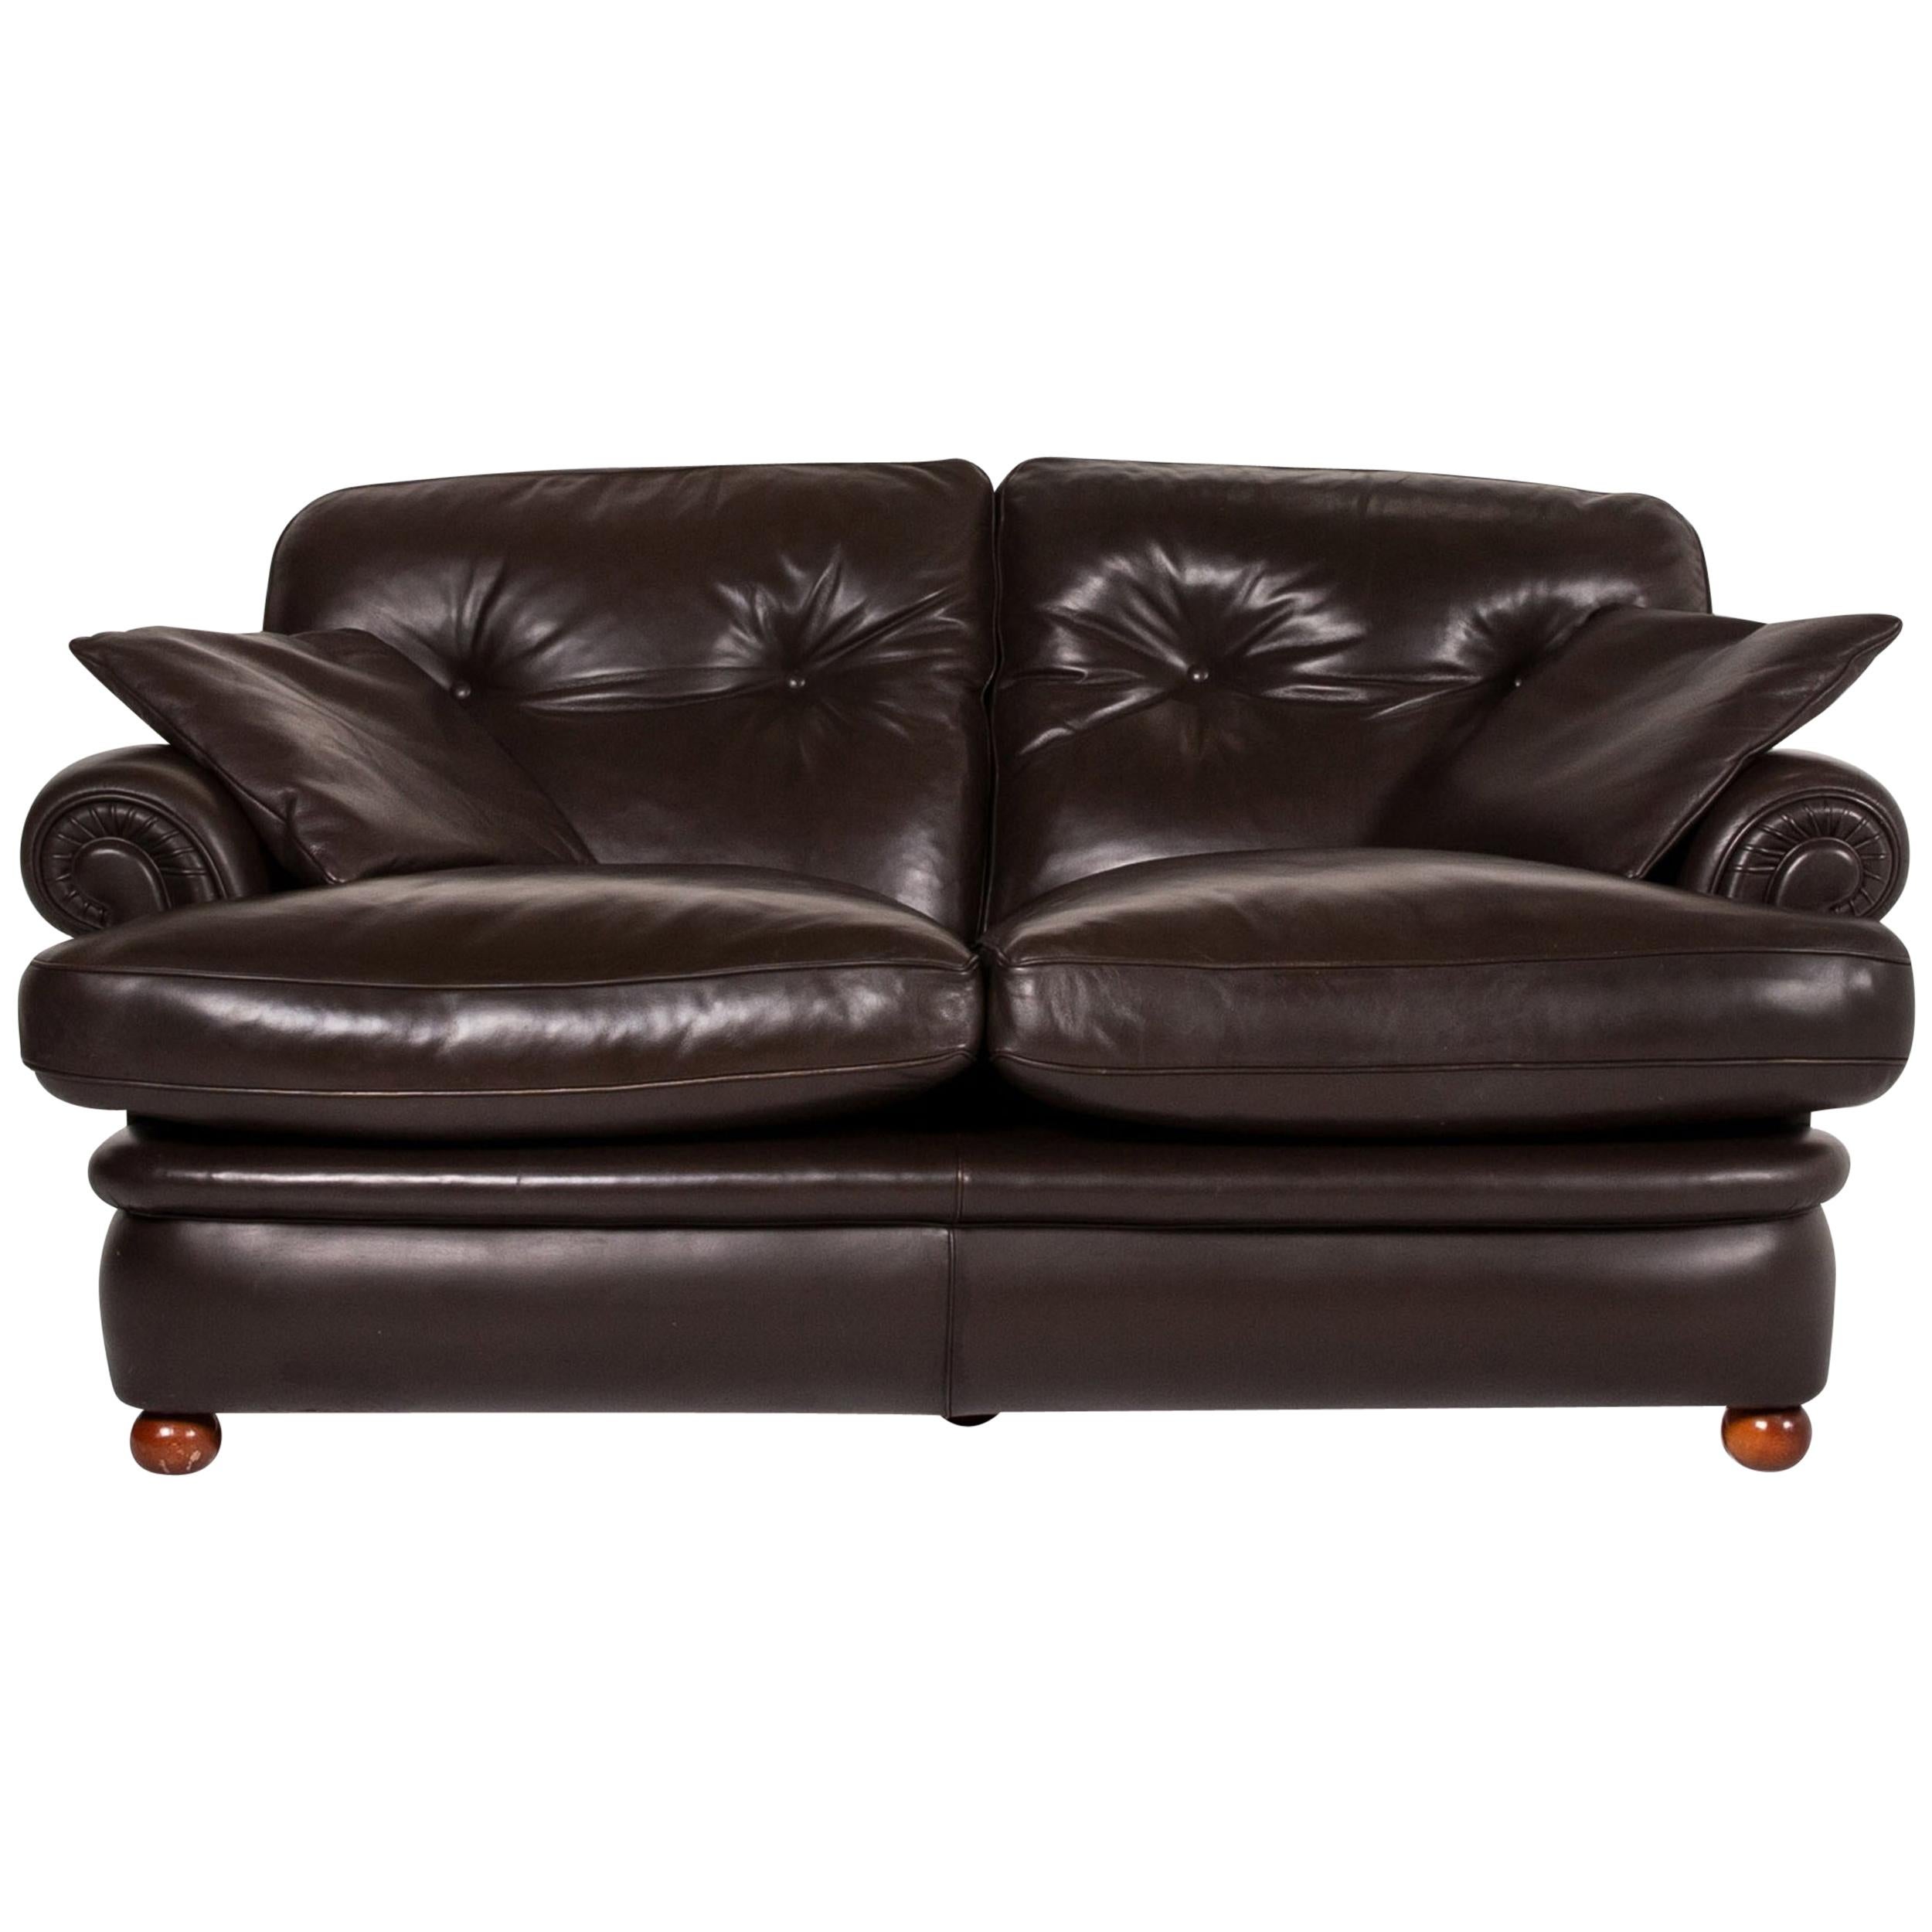 Poltrona Frau Leather Sofa Dark Brown Brown Two-Seat Couch